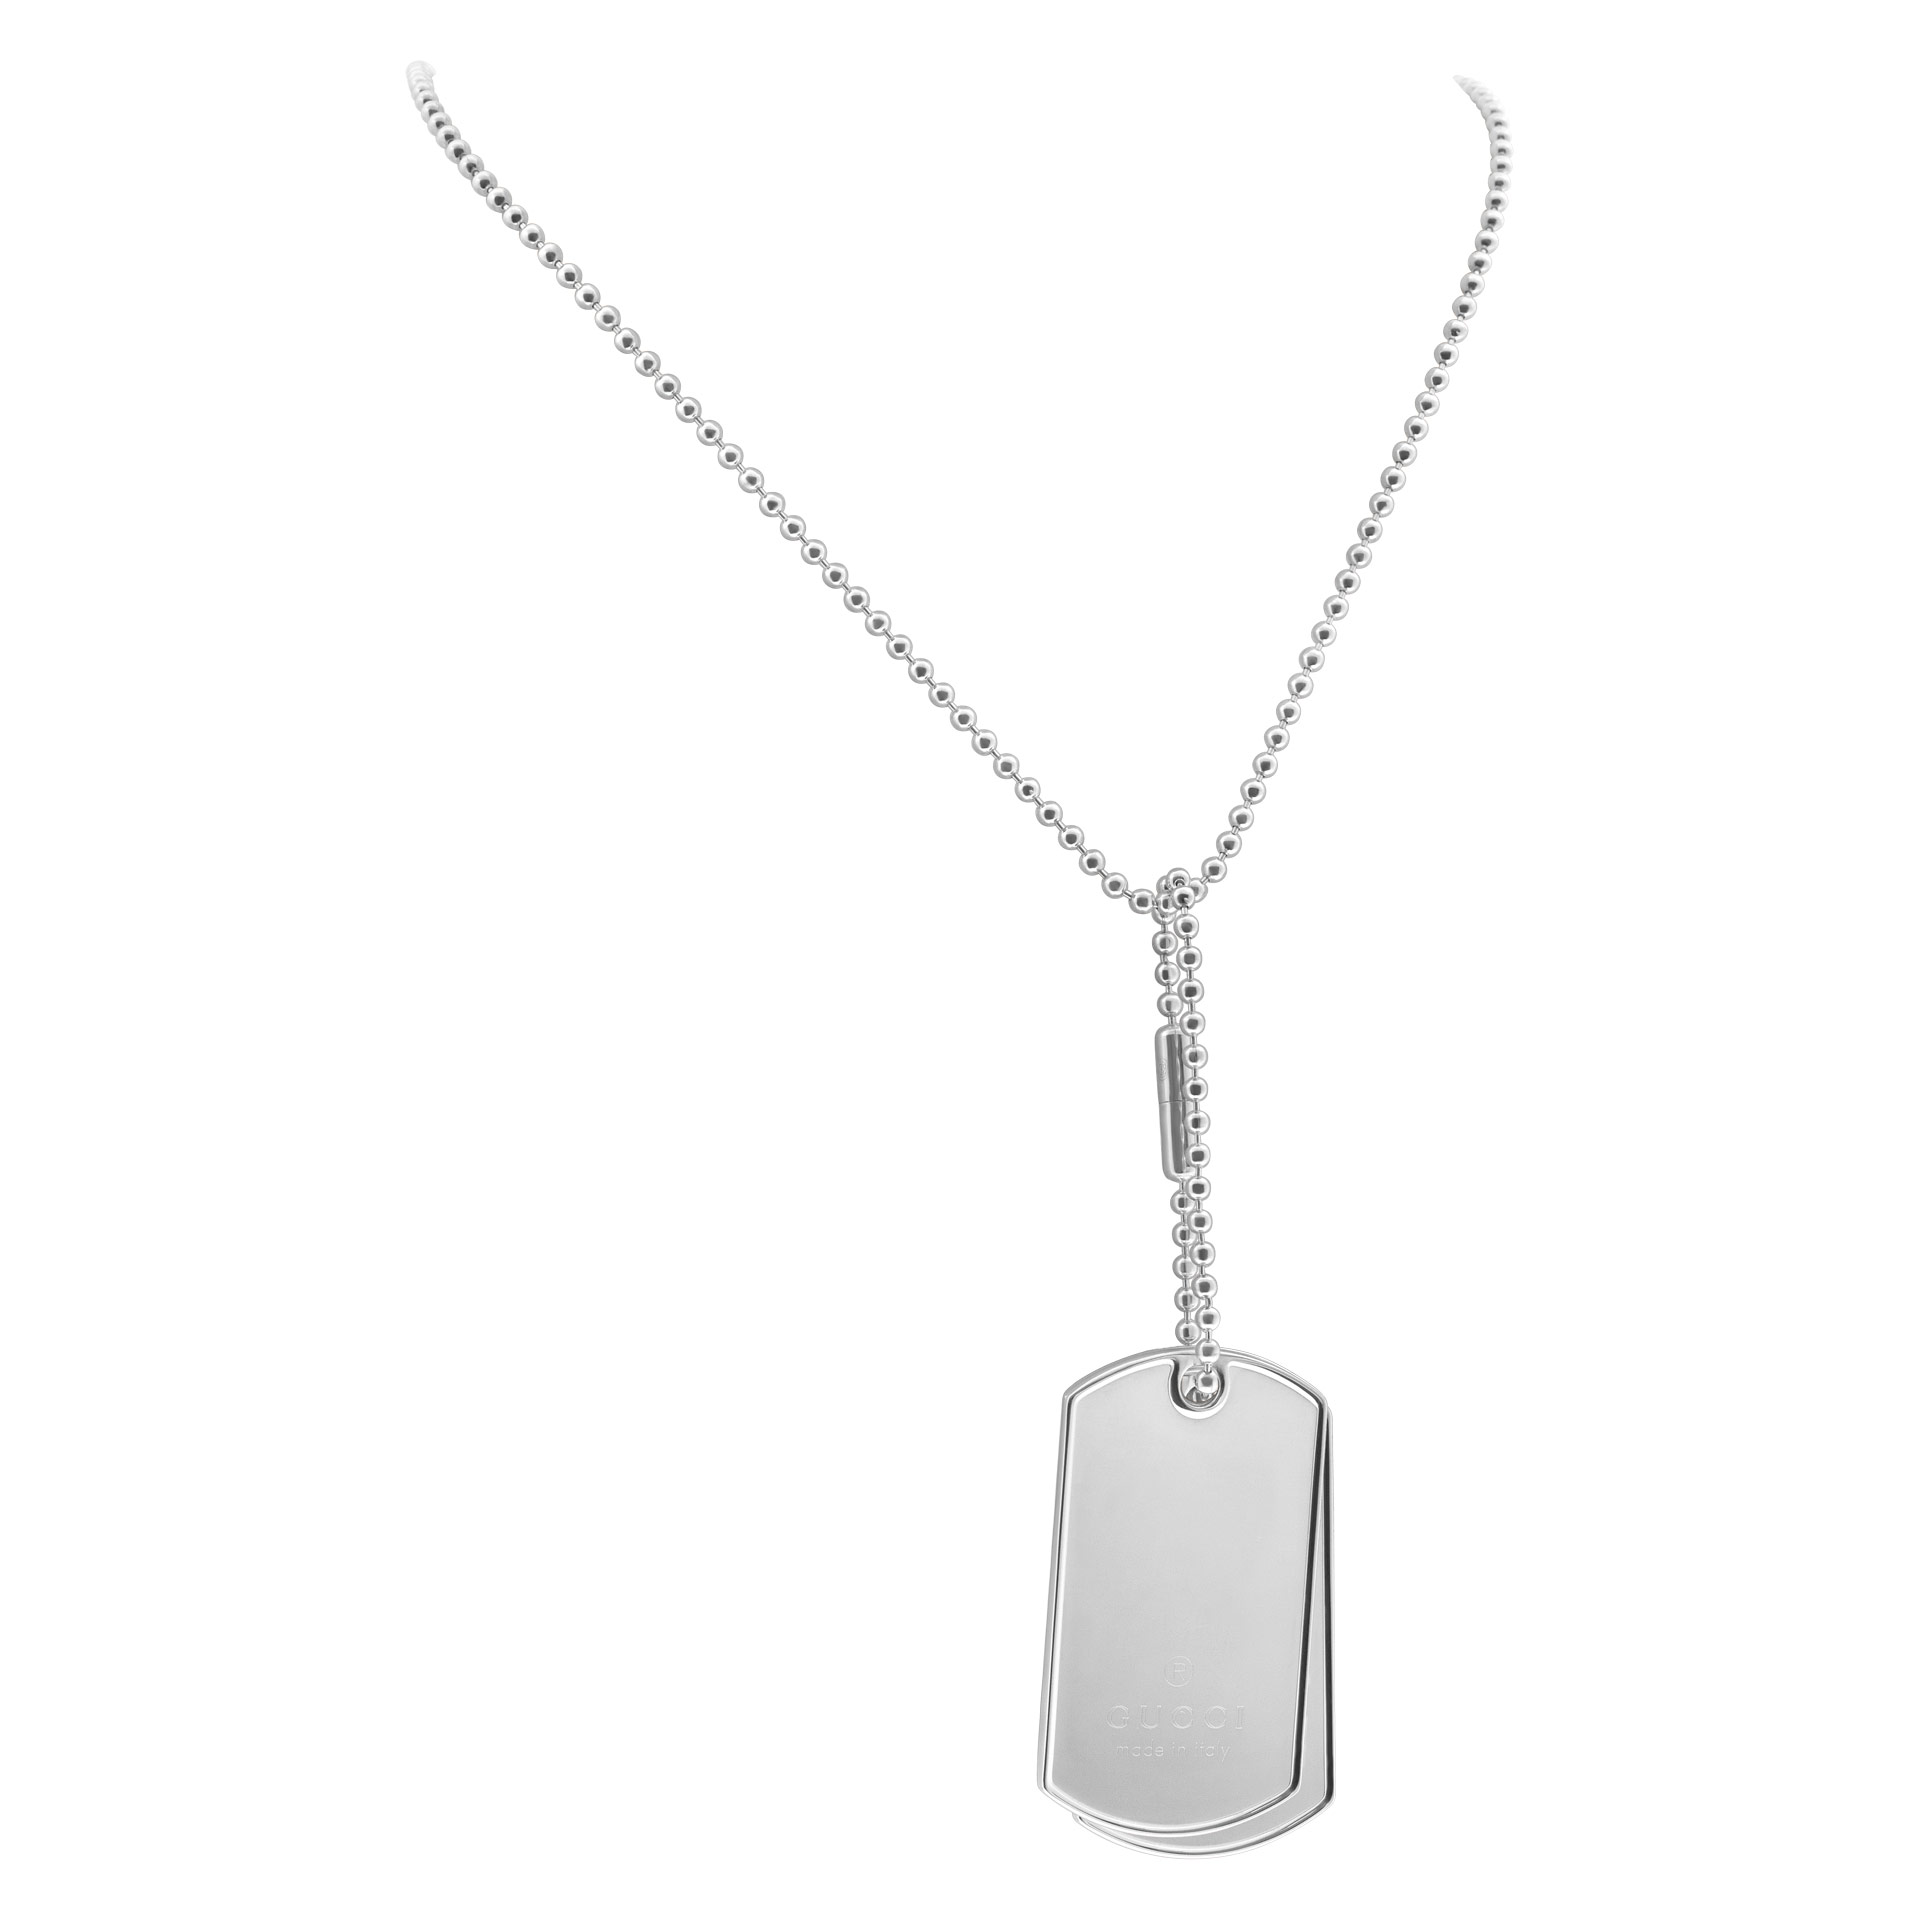 gucci sterling silver dog tag necklace